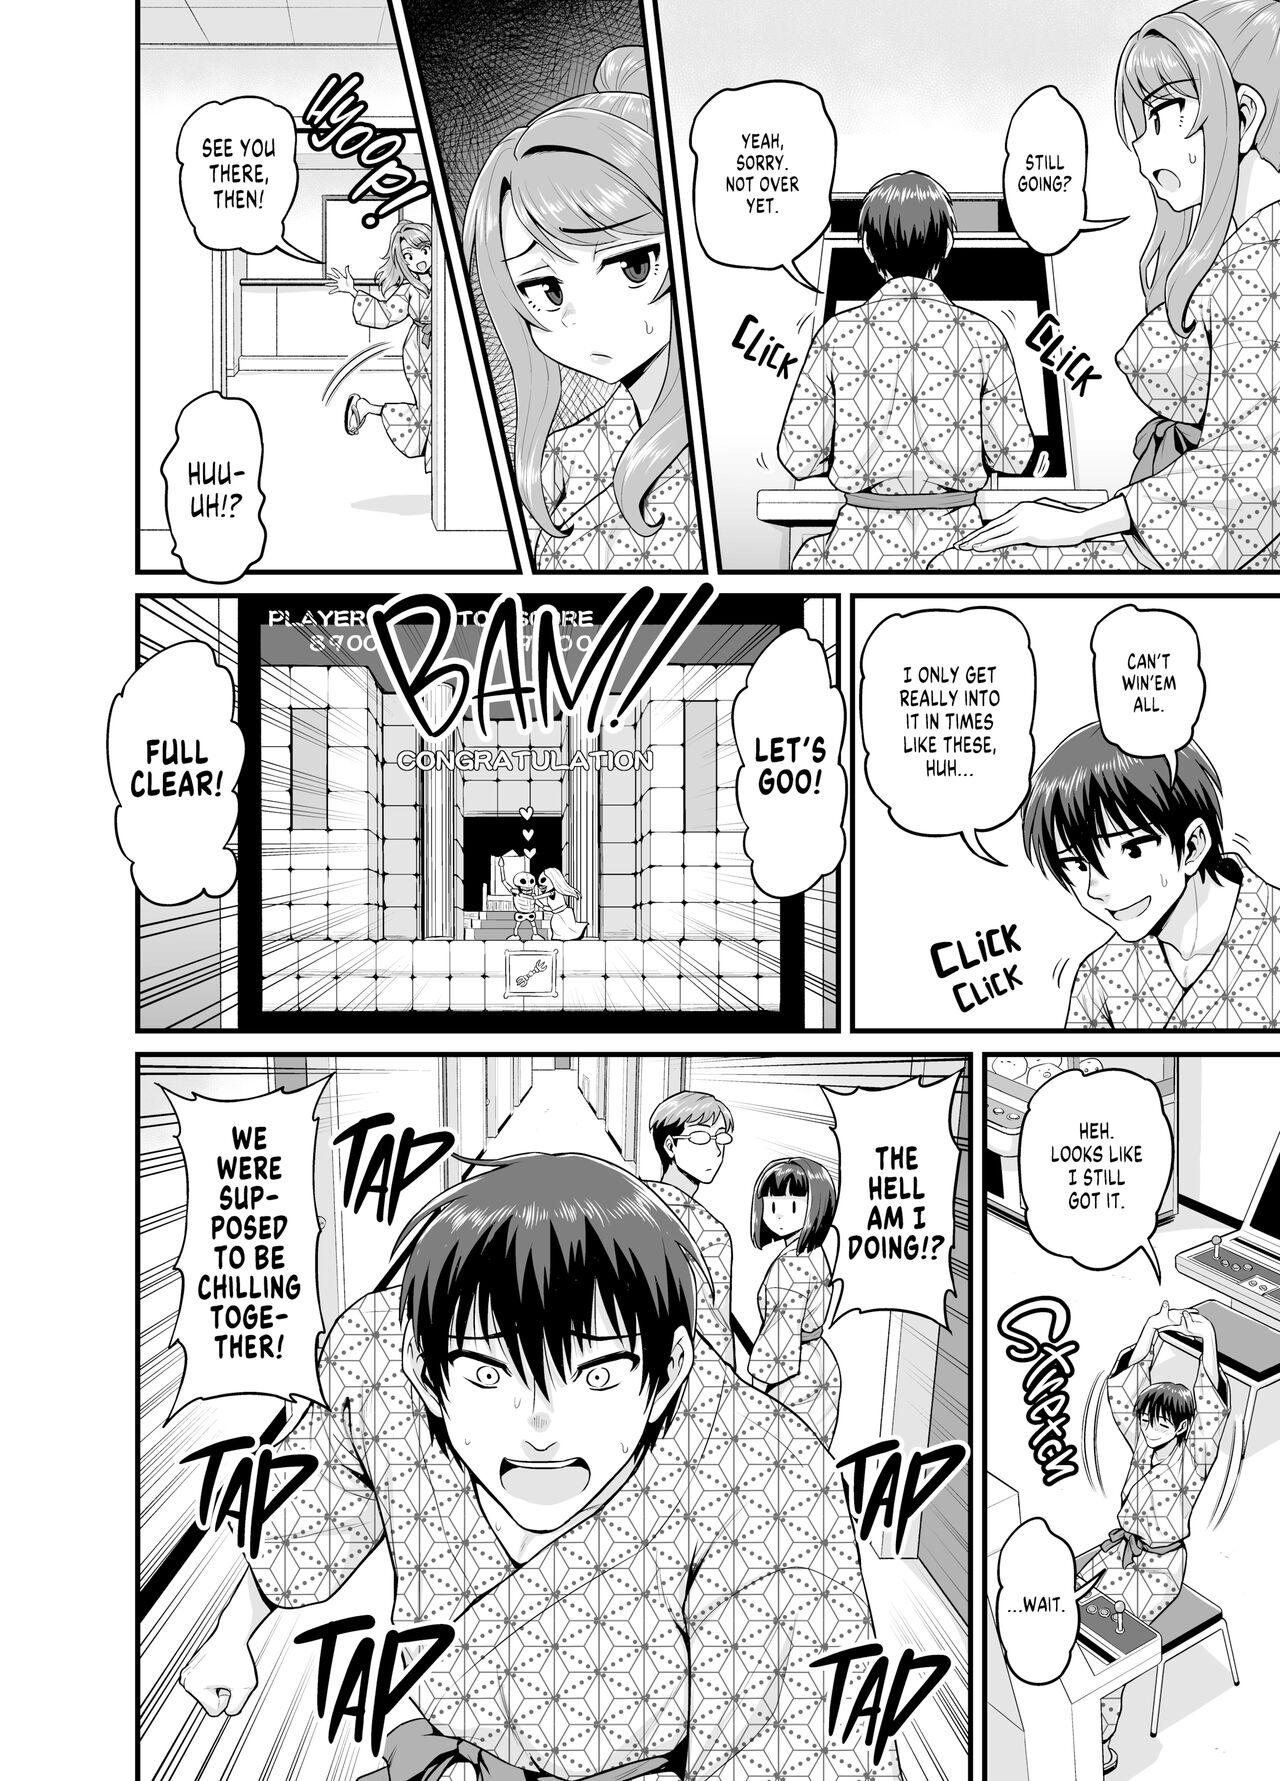 Chudai Getting it On With Your Gaming Buddy at the Hot Spring NTRVer. - Original Female Orgasm - Page 11